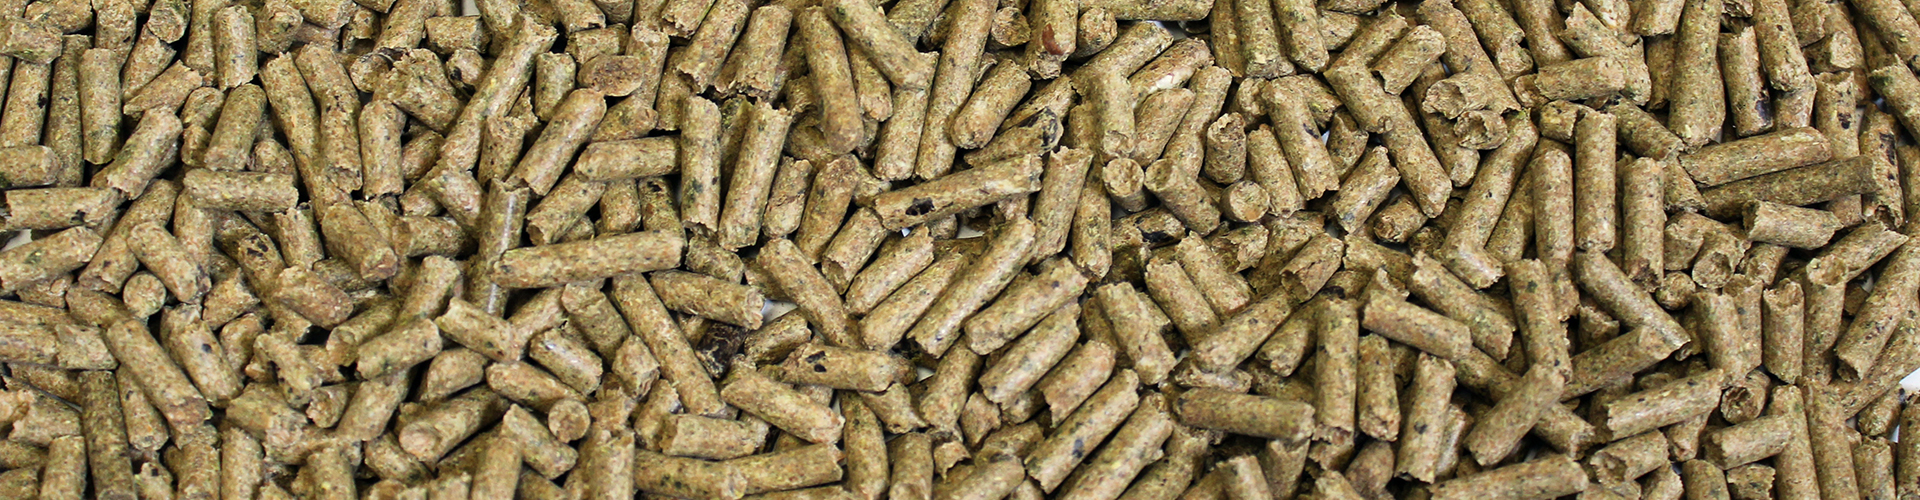 Decade® Complete Diet feed closeup image